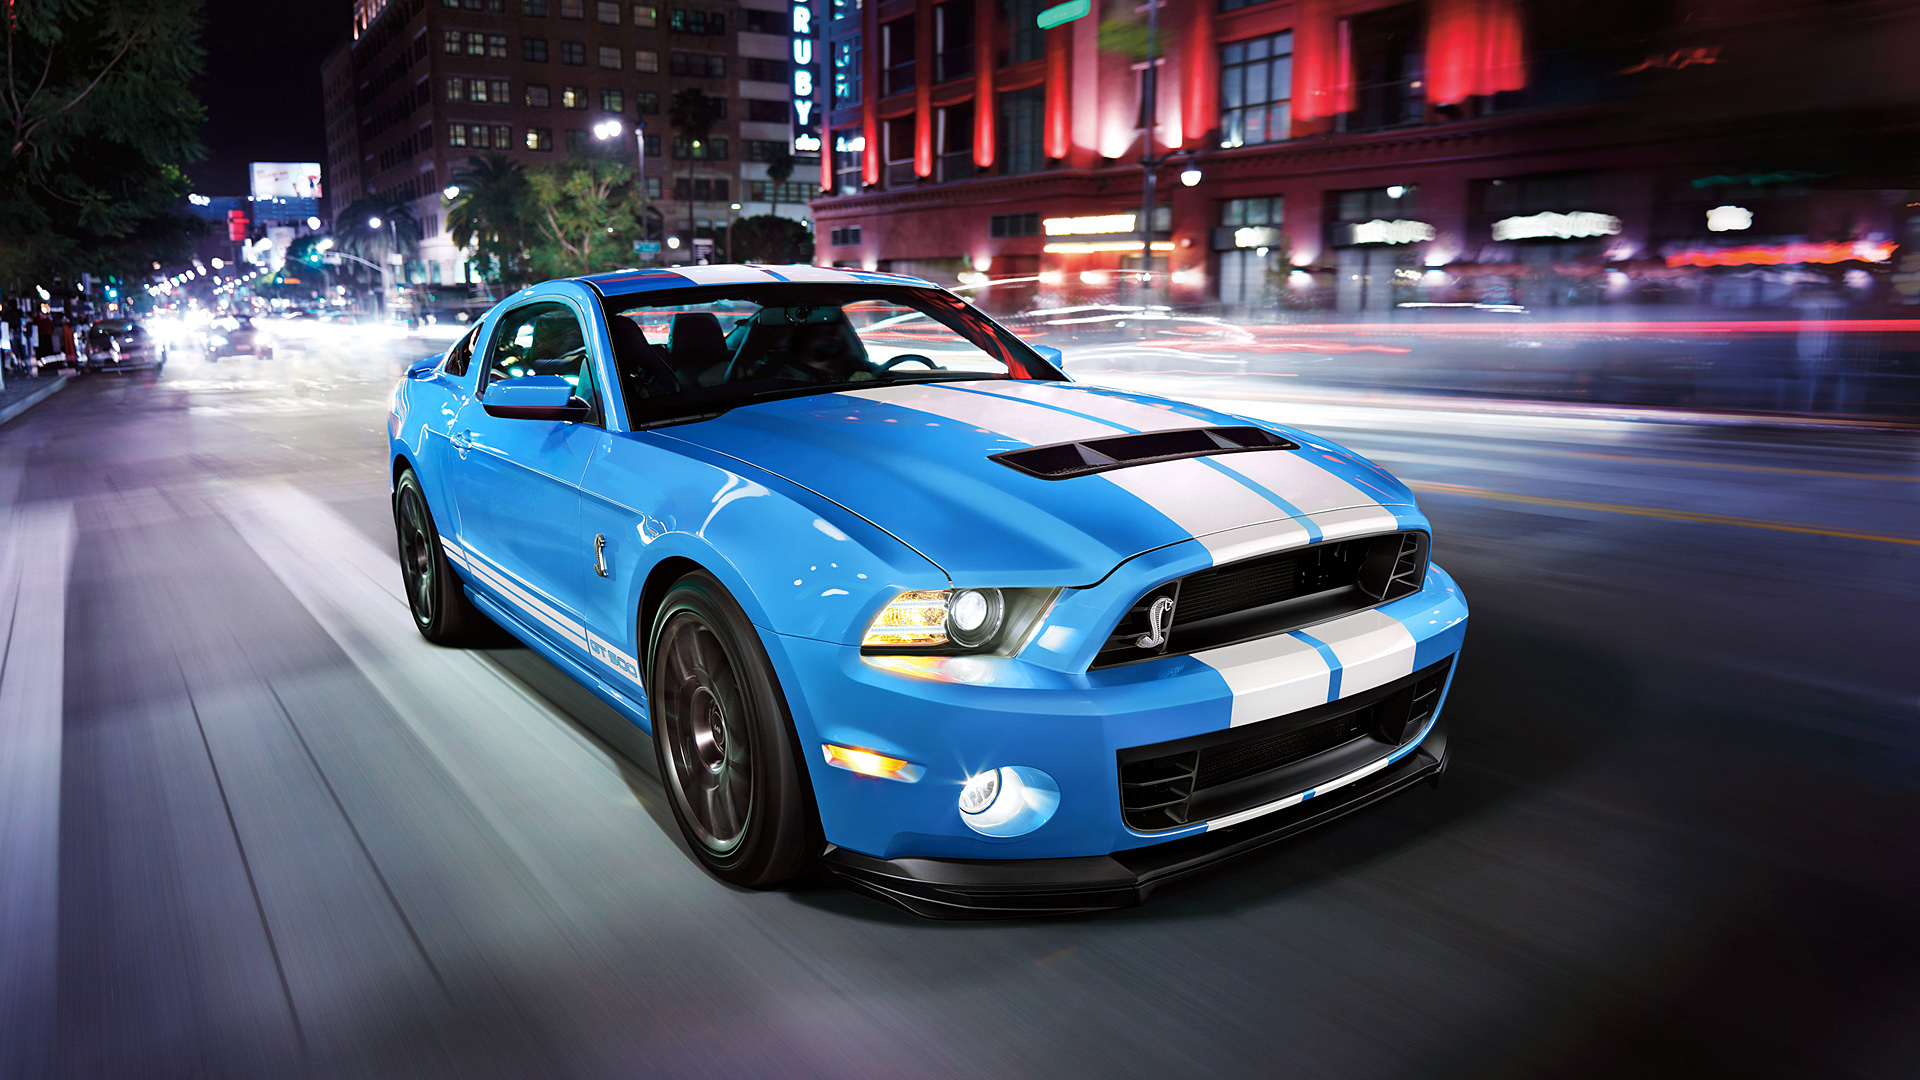  2014 Ford Shelby Mustang GT500 Wallpaper.